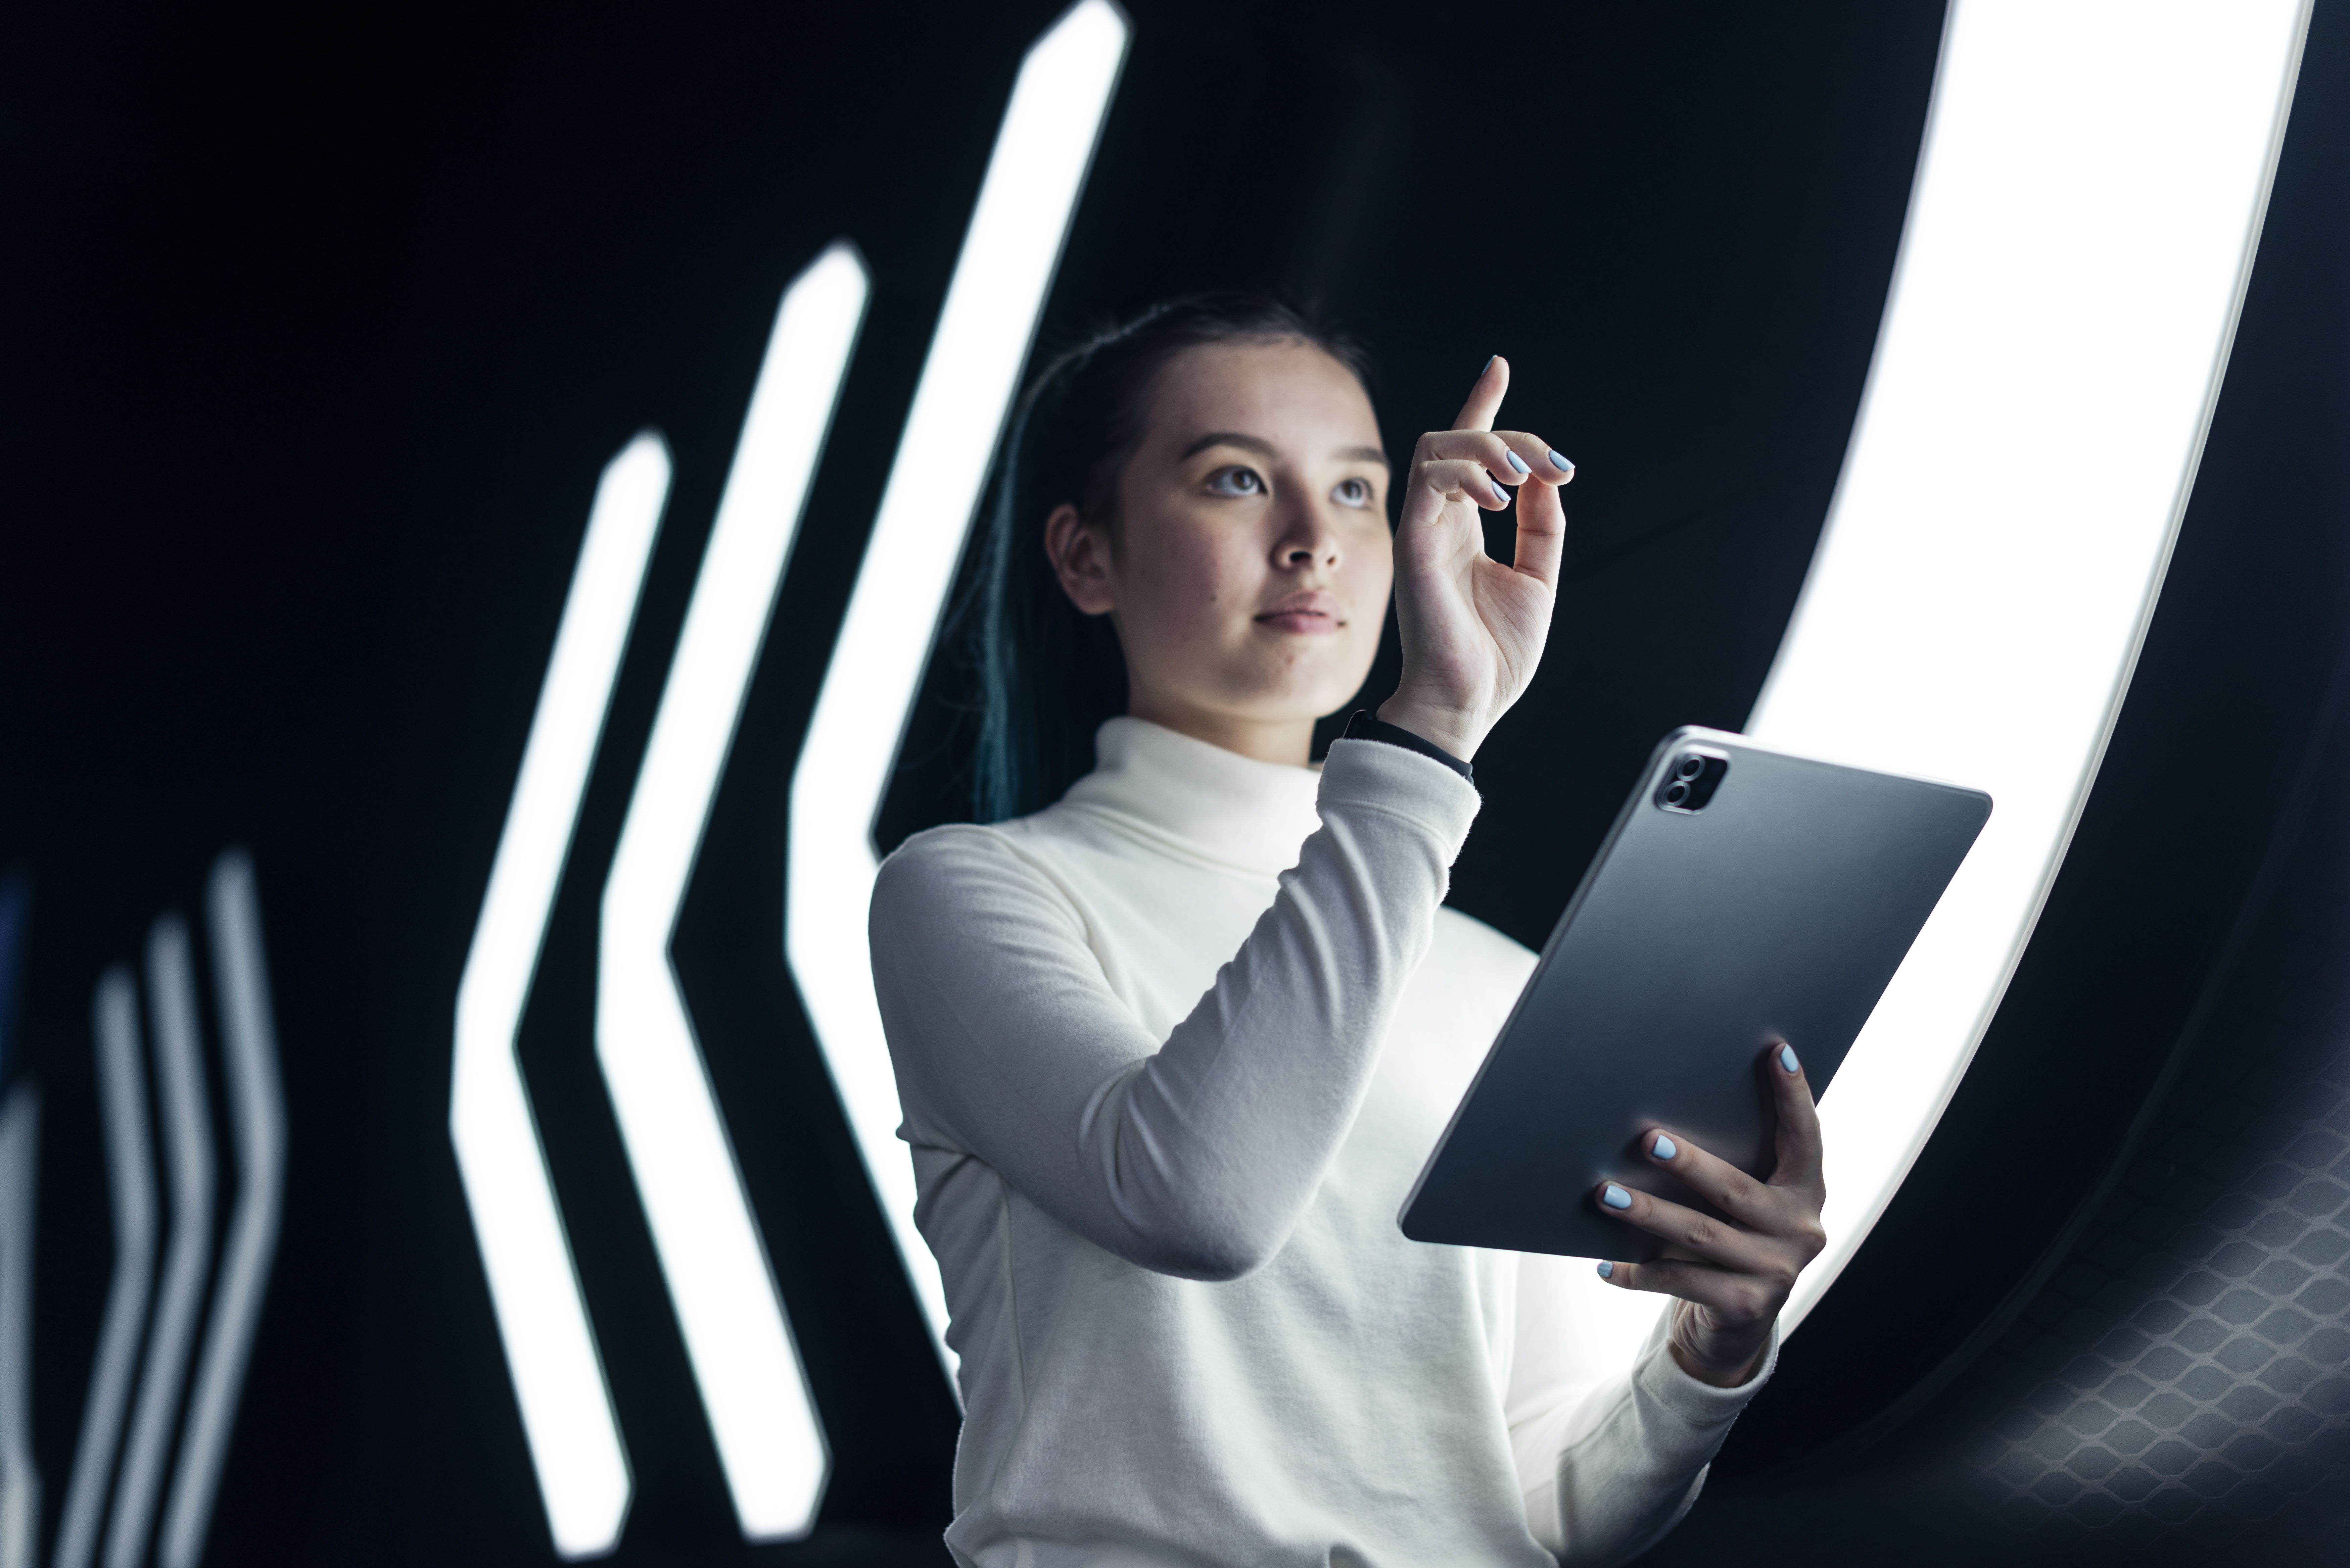 A young woman interacting with a futuristic interface while holding a tablet in a high-tech environment with glowing neon lights.